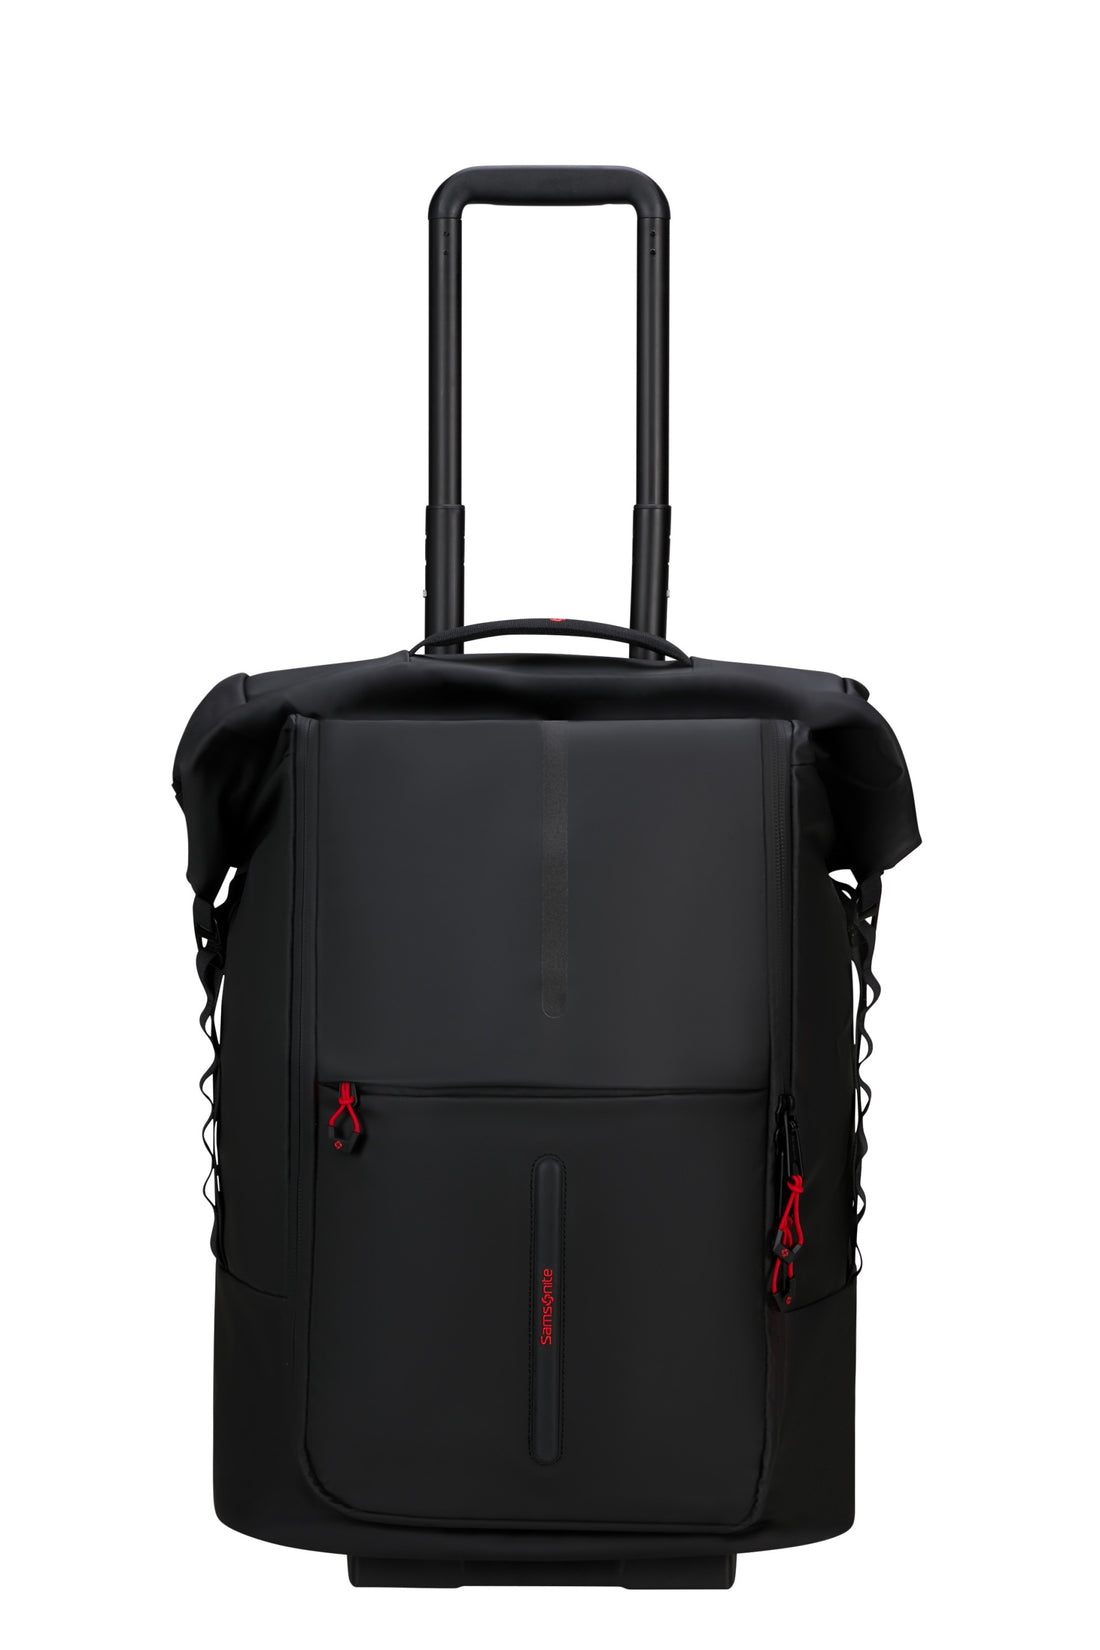 Samsonite Ecodiver Foldable duffle with wheels 4-in-1